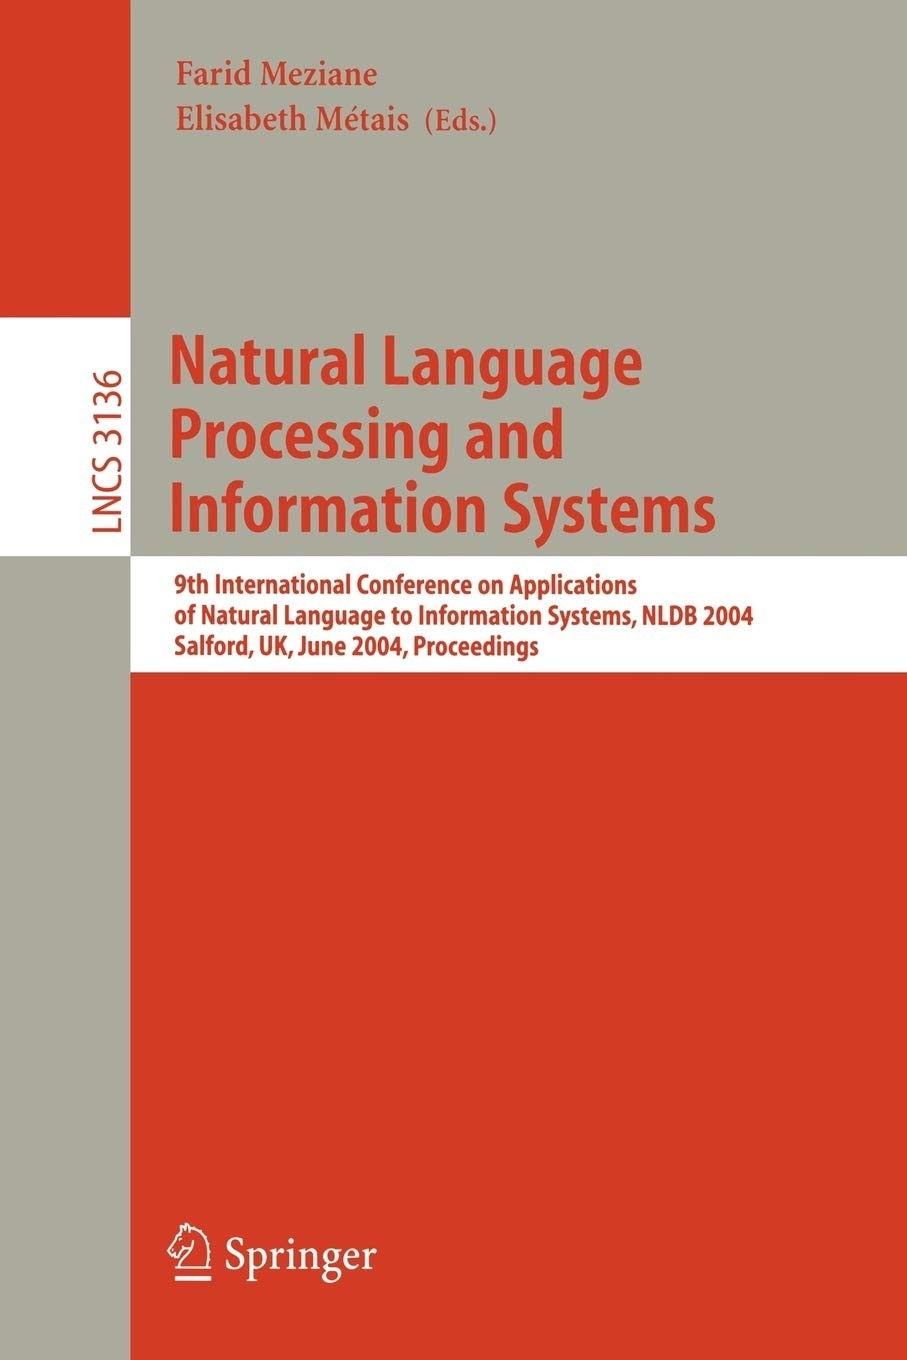 Natural Language Processing and Information Systems: 9th International Conference on Applications of Natural Languages to Information Systems, NLDB 2004, Salford, UK, June 23-25, 2004, Proceedings